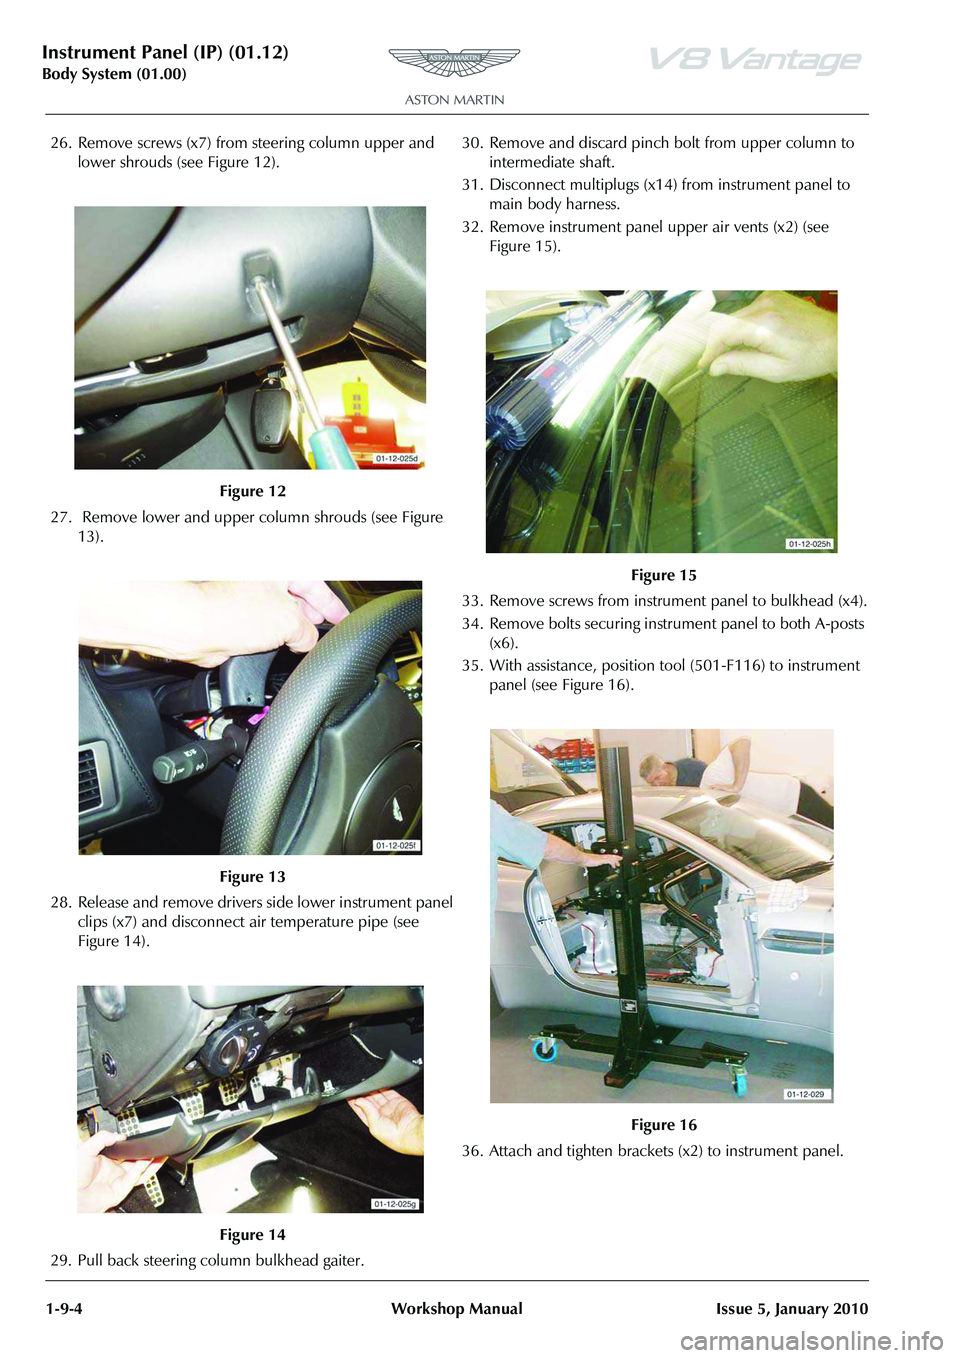 ASTON MARTIN V8 VANTAGE 2010  Workshop Manual Instrument Panel (IP) (01.12)
Body System (01.00)1-9-4 Workshop Manual Issue 5, January 2010
26. Remove screws (x7) from steering column upper and  lower shrouds (see Figure 12).
27.  Remove lower and